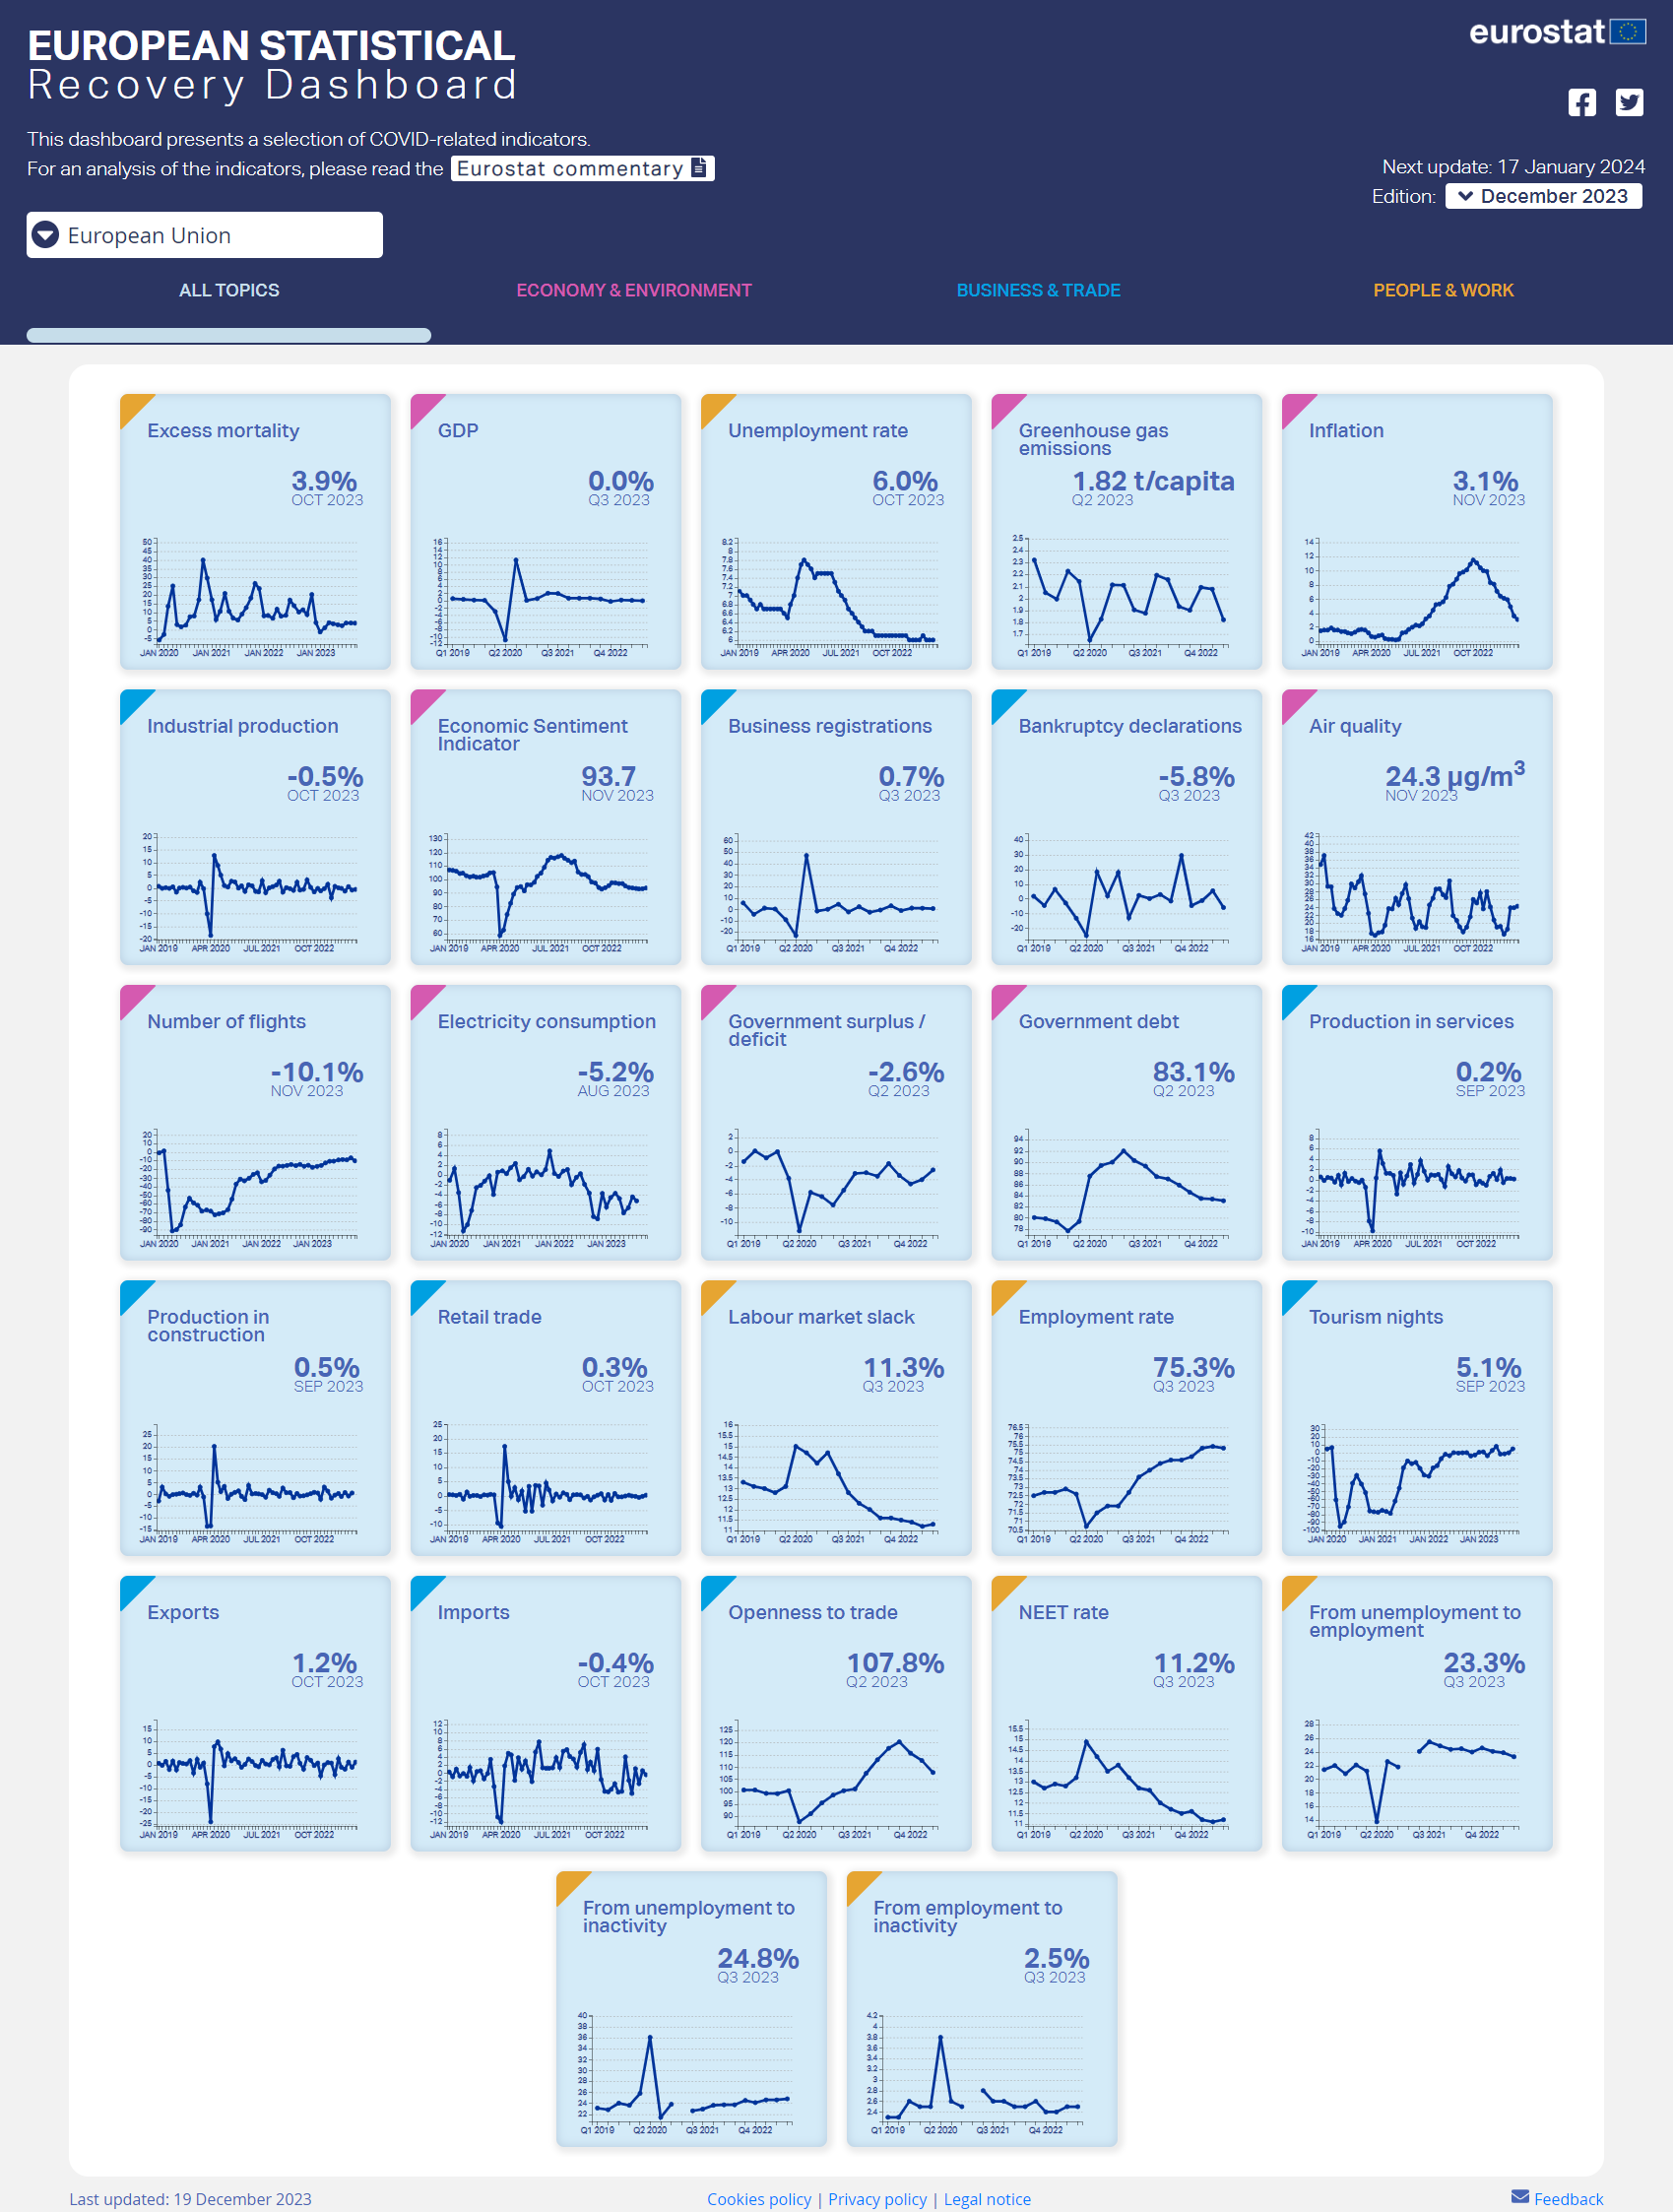 European Statistical Recovery Dashboard - December edition